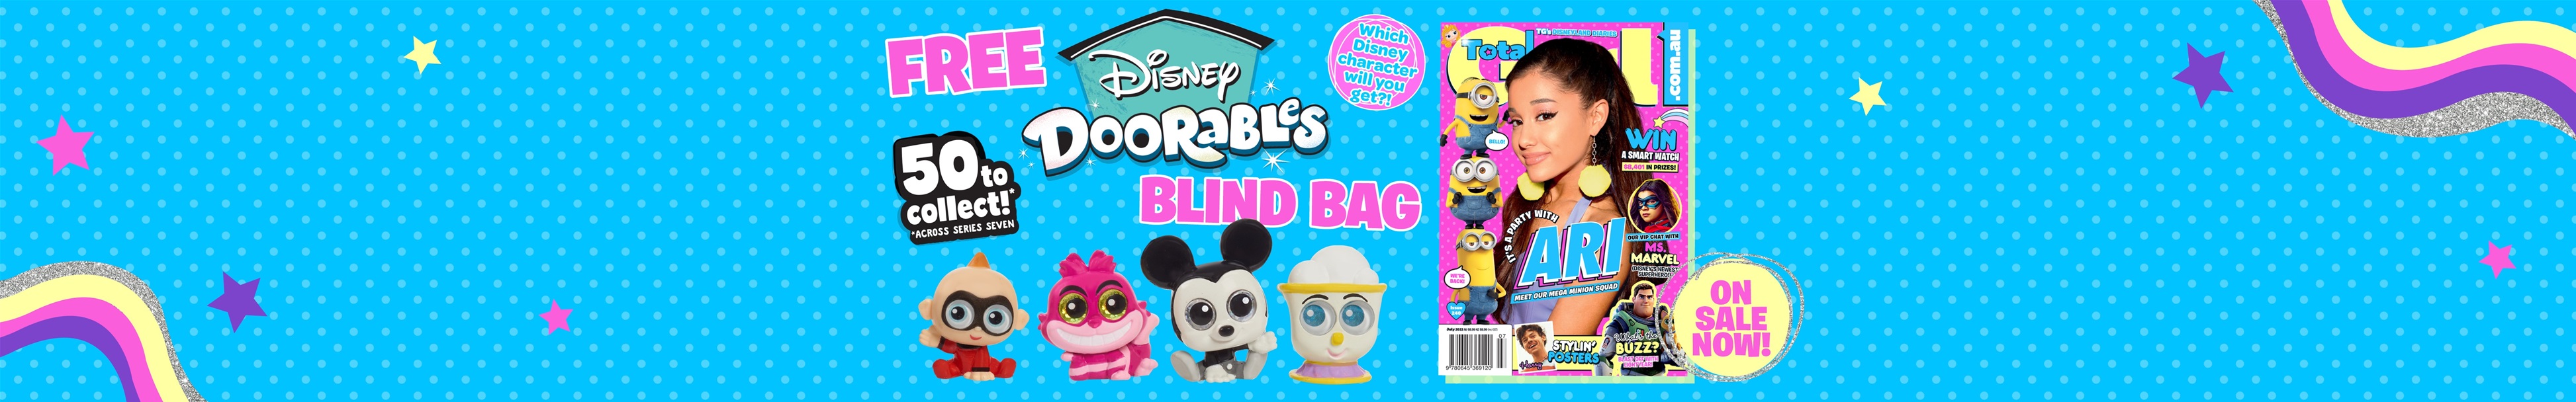 FREE Disney Doorables with the July mag! Plus Minions and more!